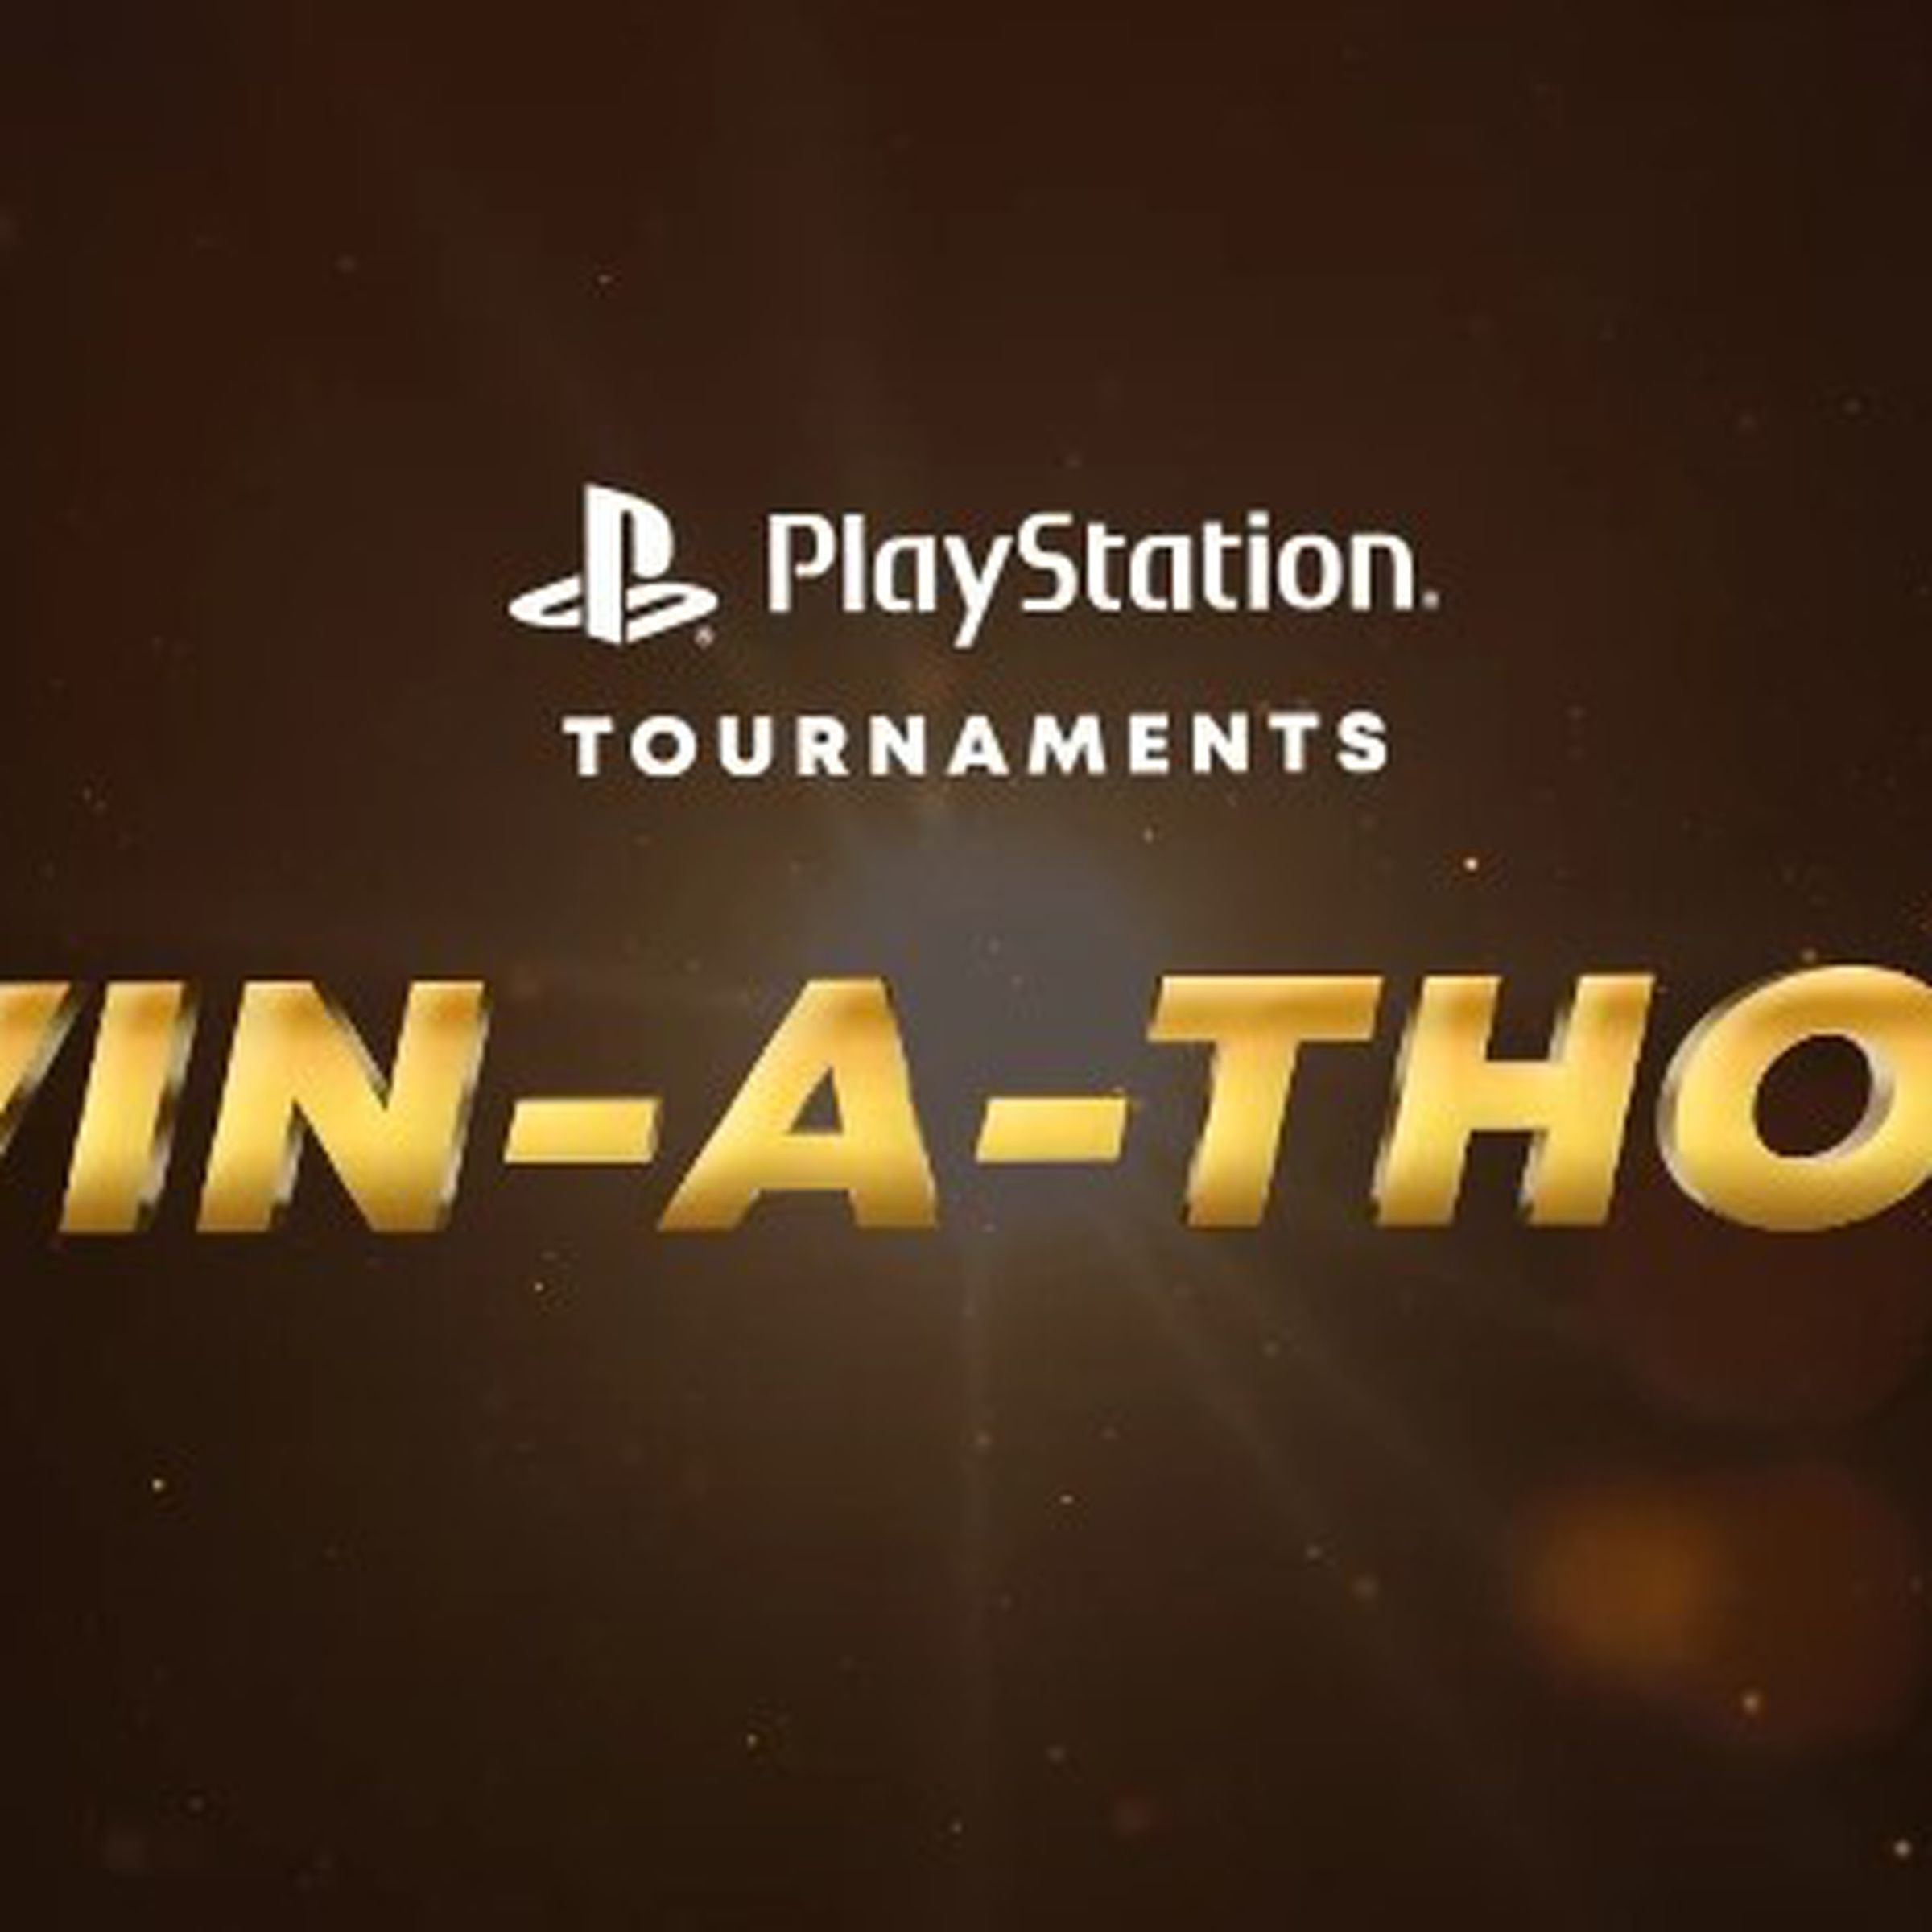 A promotional image for PlayStation’s Win-A-Thon tournament